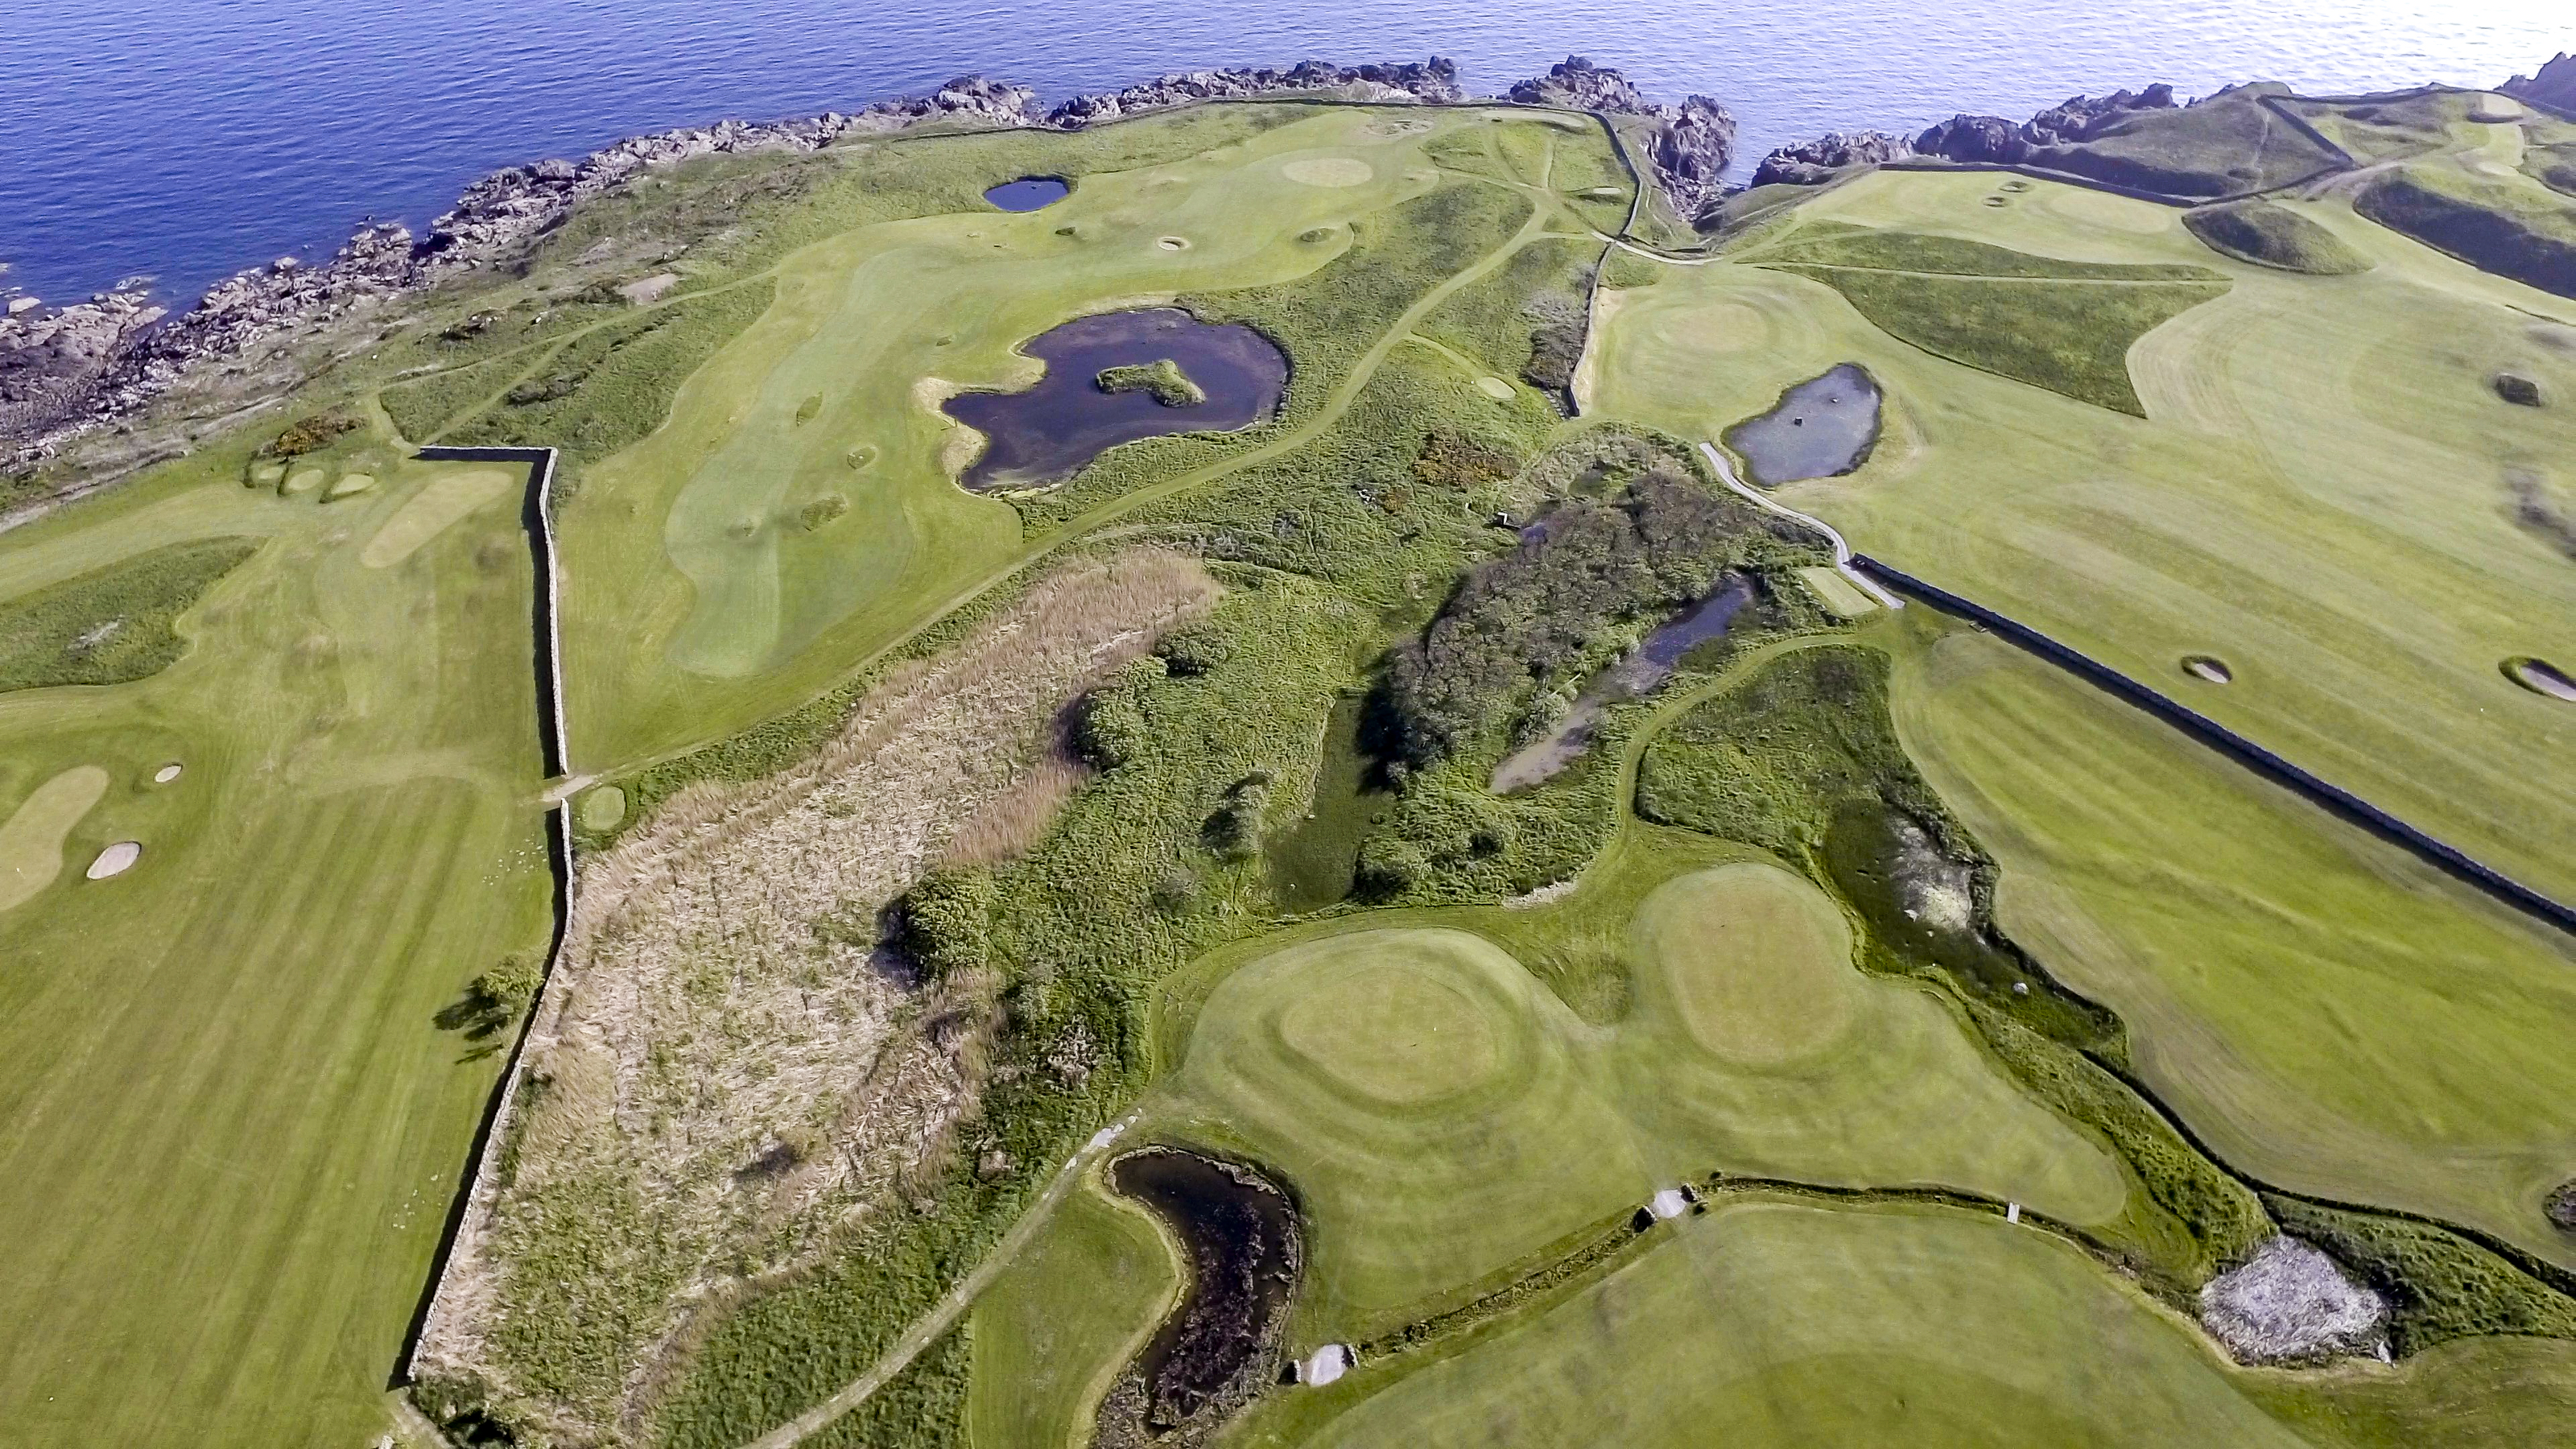 The natural coastal terrain and varying lengths of the tees change the character of each hole and the course more interesting and challenging whatever your ability and handicap.